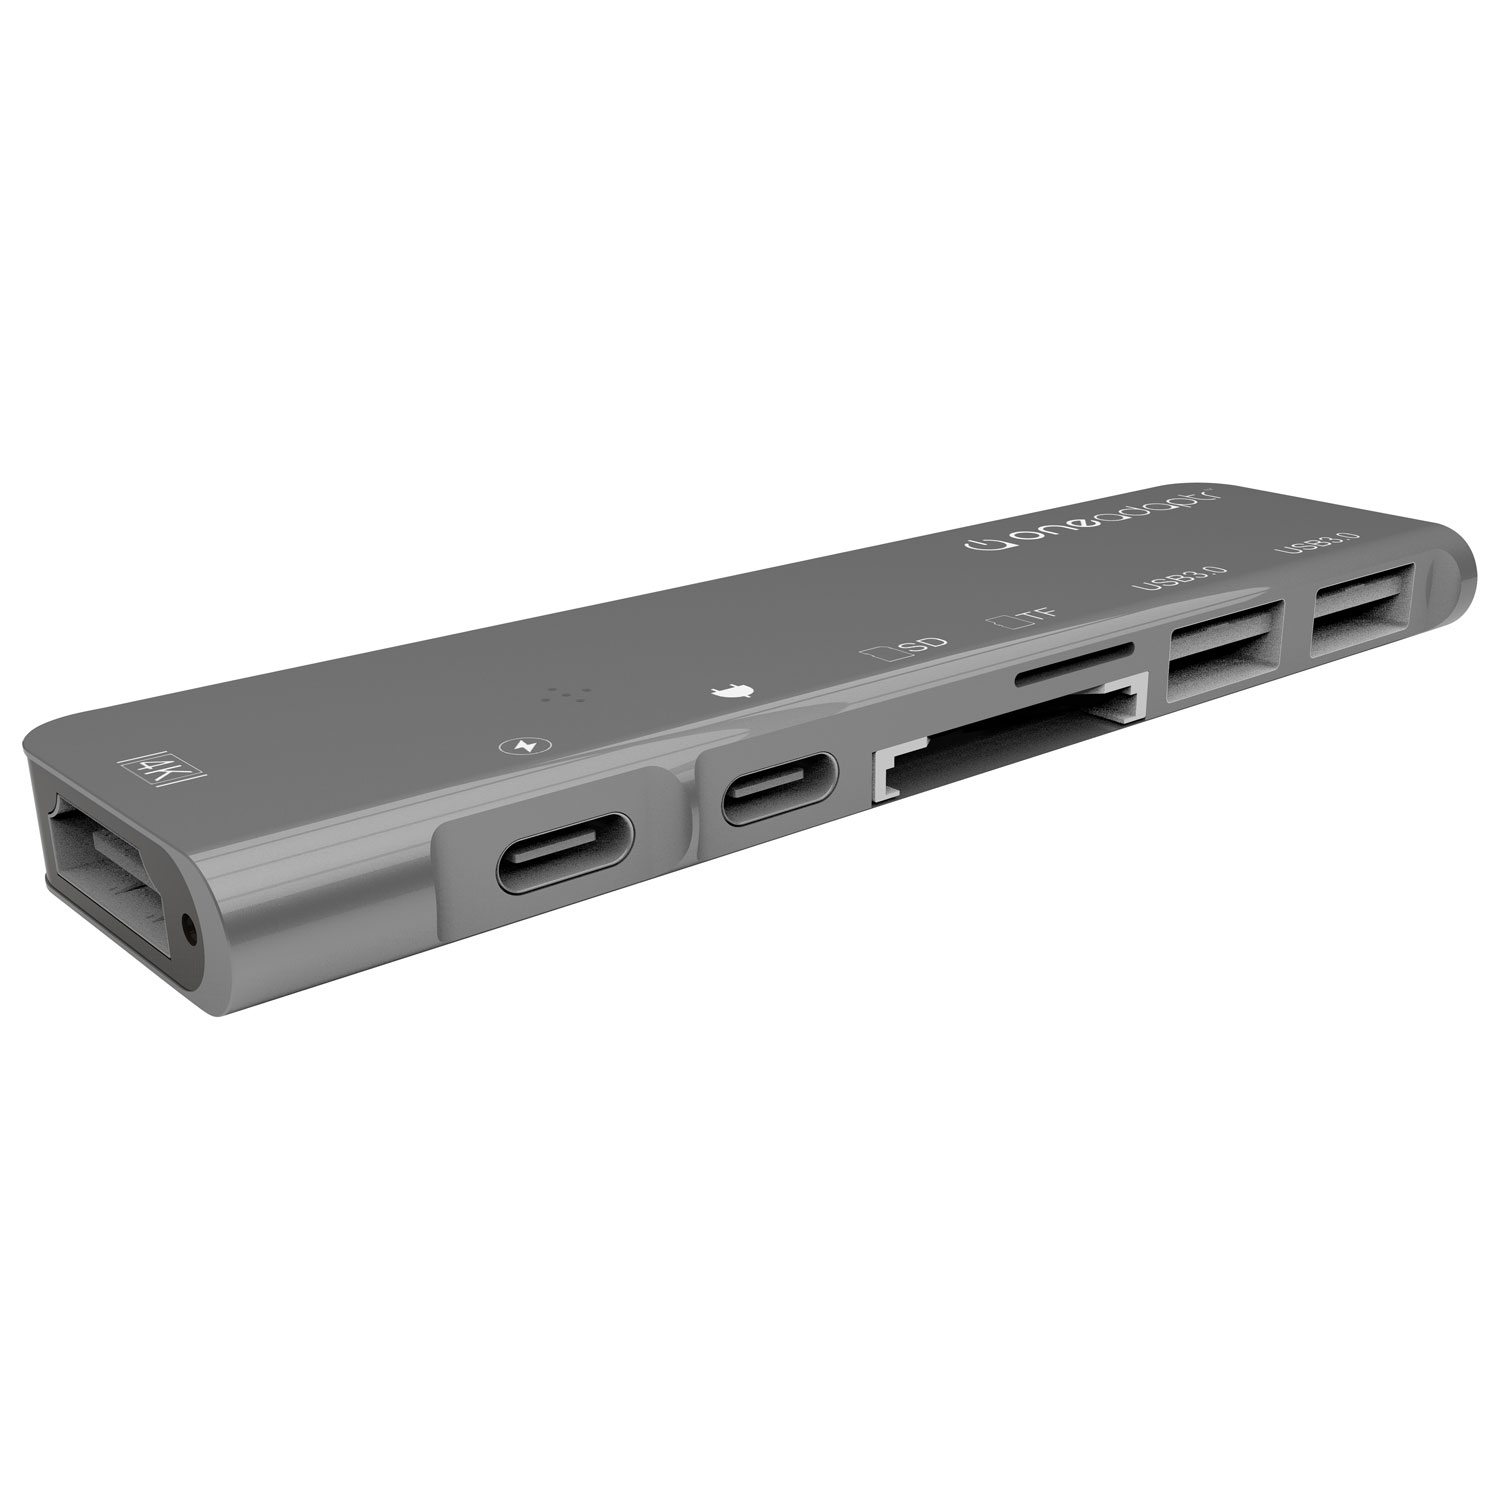 OneAdaptr EVRI Thunderbolt 3 Hub for Macbook Pro with Power Delivery (EV-UHC-7IS)